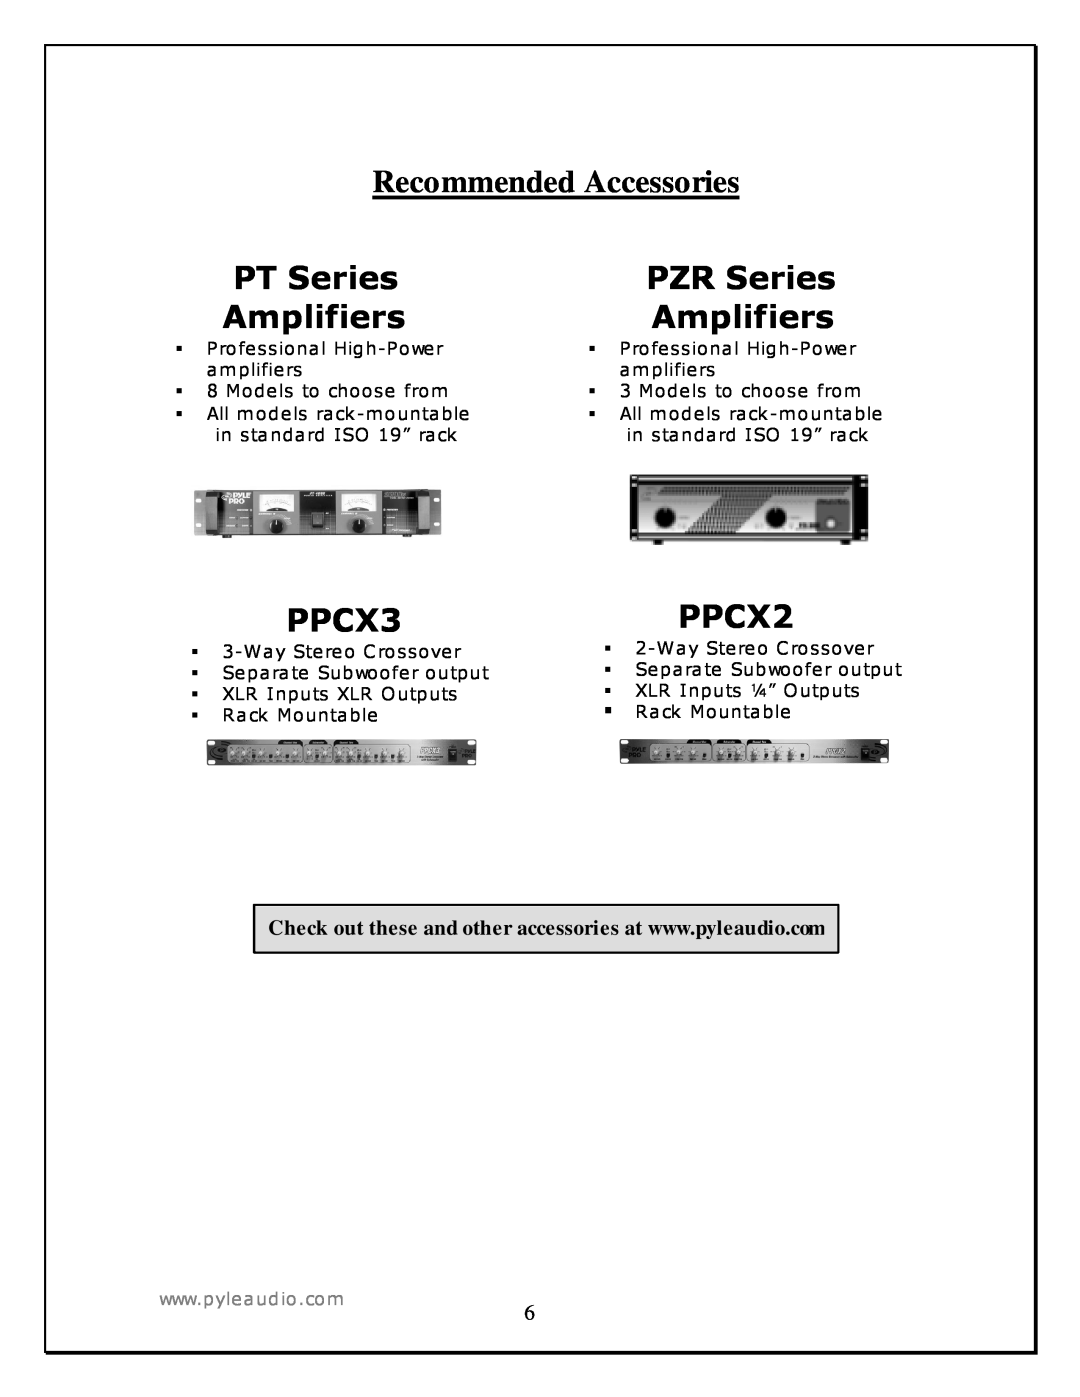 PYLE Audio PAHT4 manual Recommended Accessories 